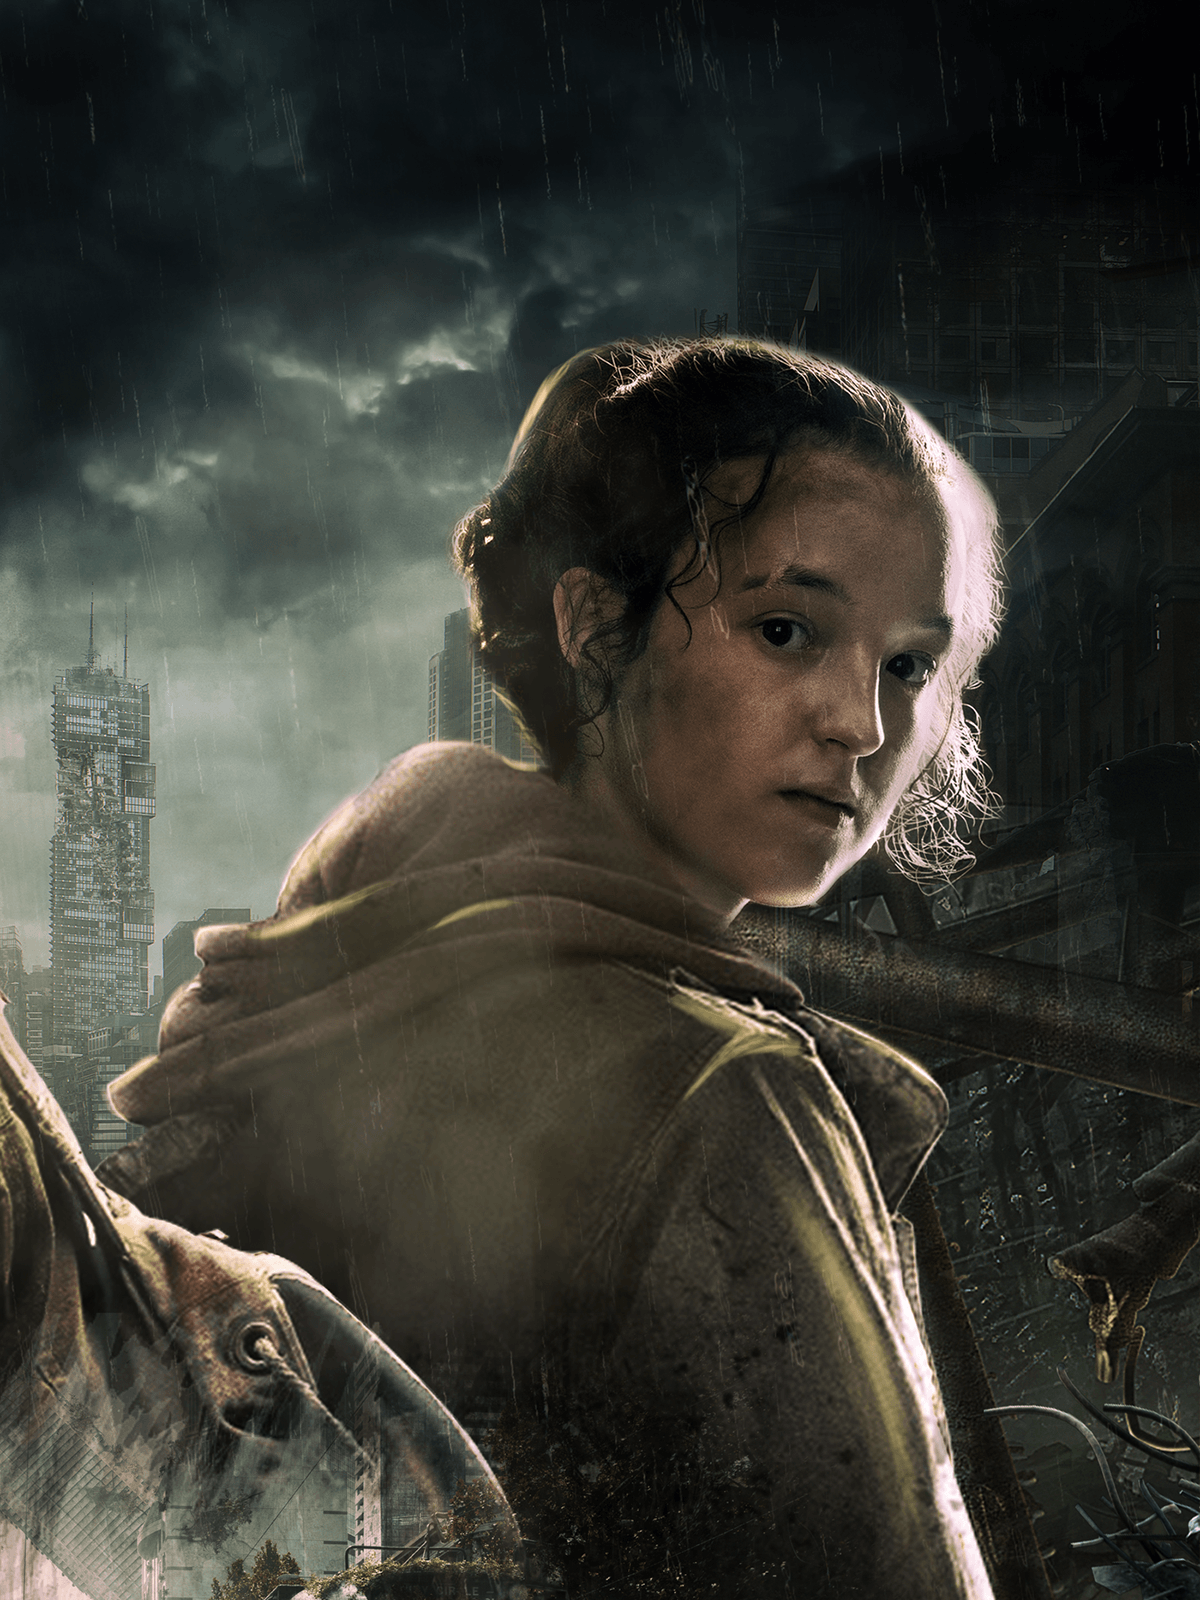 The Last of Us tlou movie poster photoshop photomanipulation Digital Art  Poster Design posters